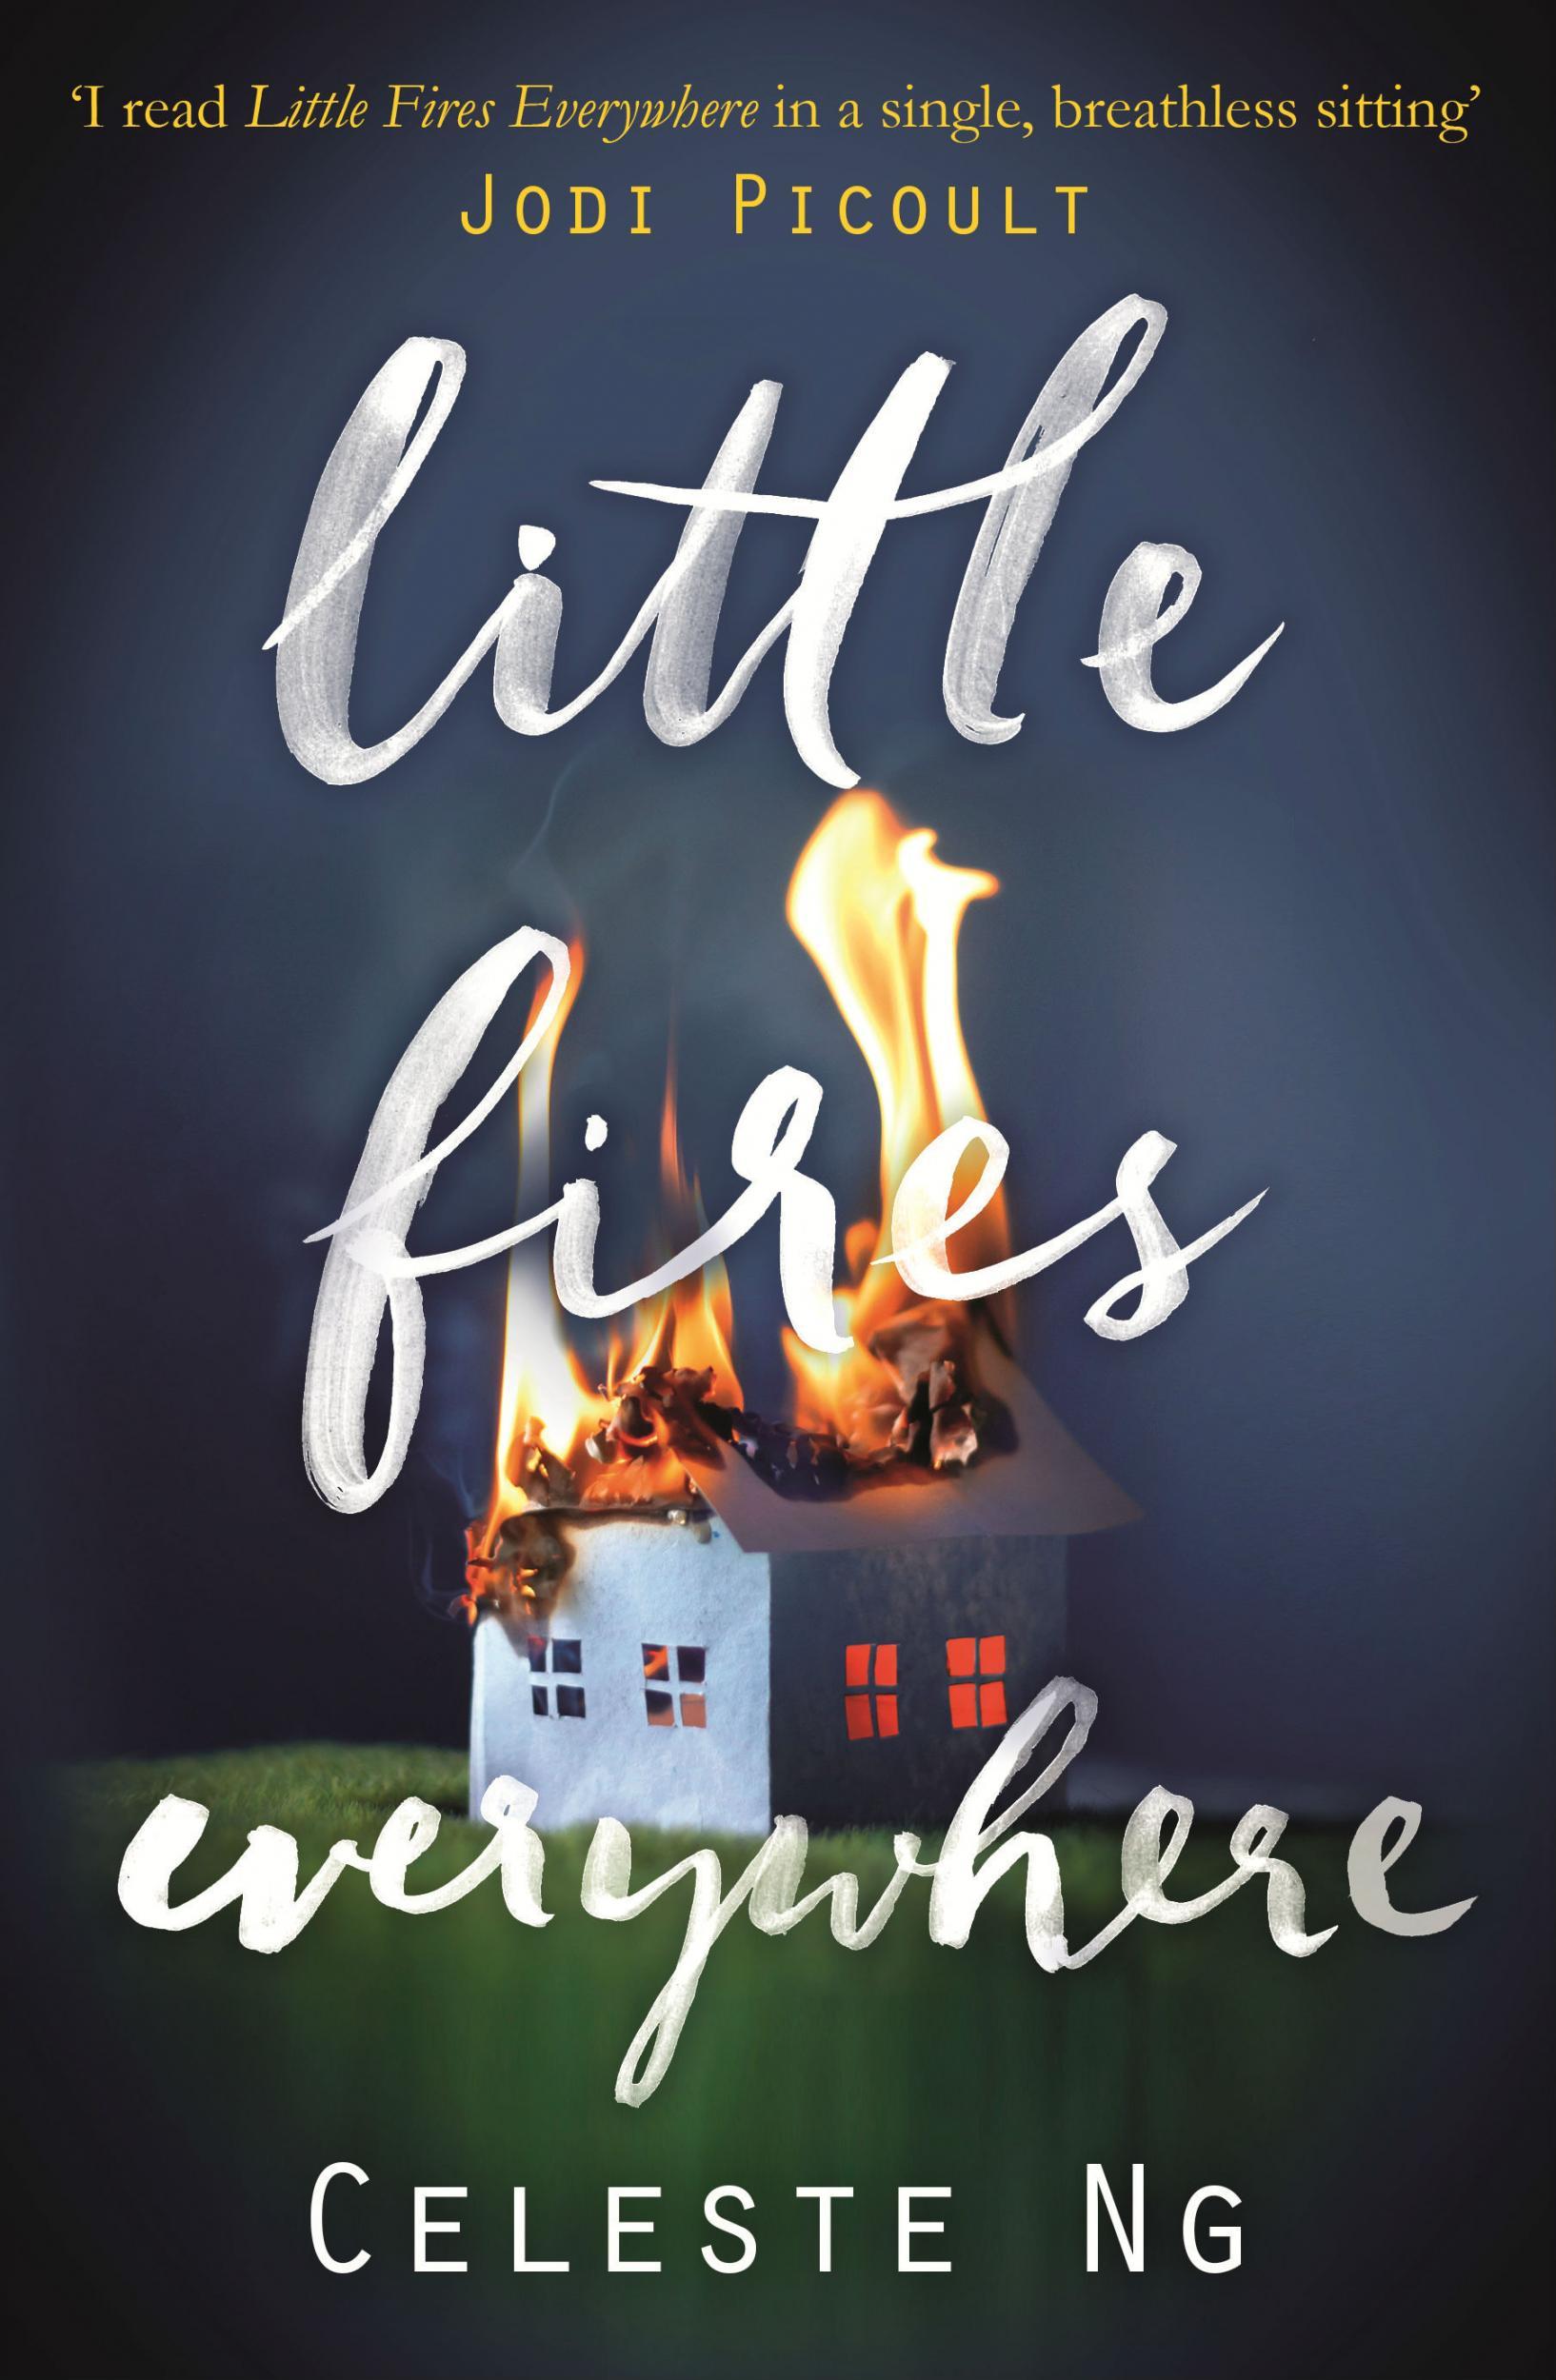 Little Fires Everywhere by Celest Ng. ISBN: 9780143135166 Publisher: Penguin Books